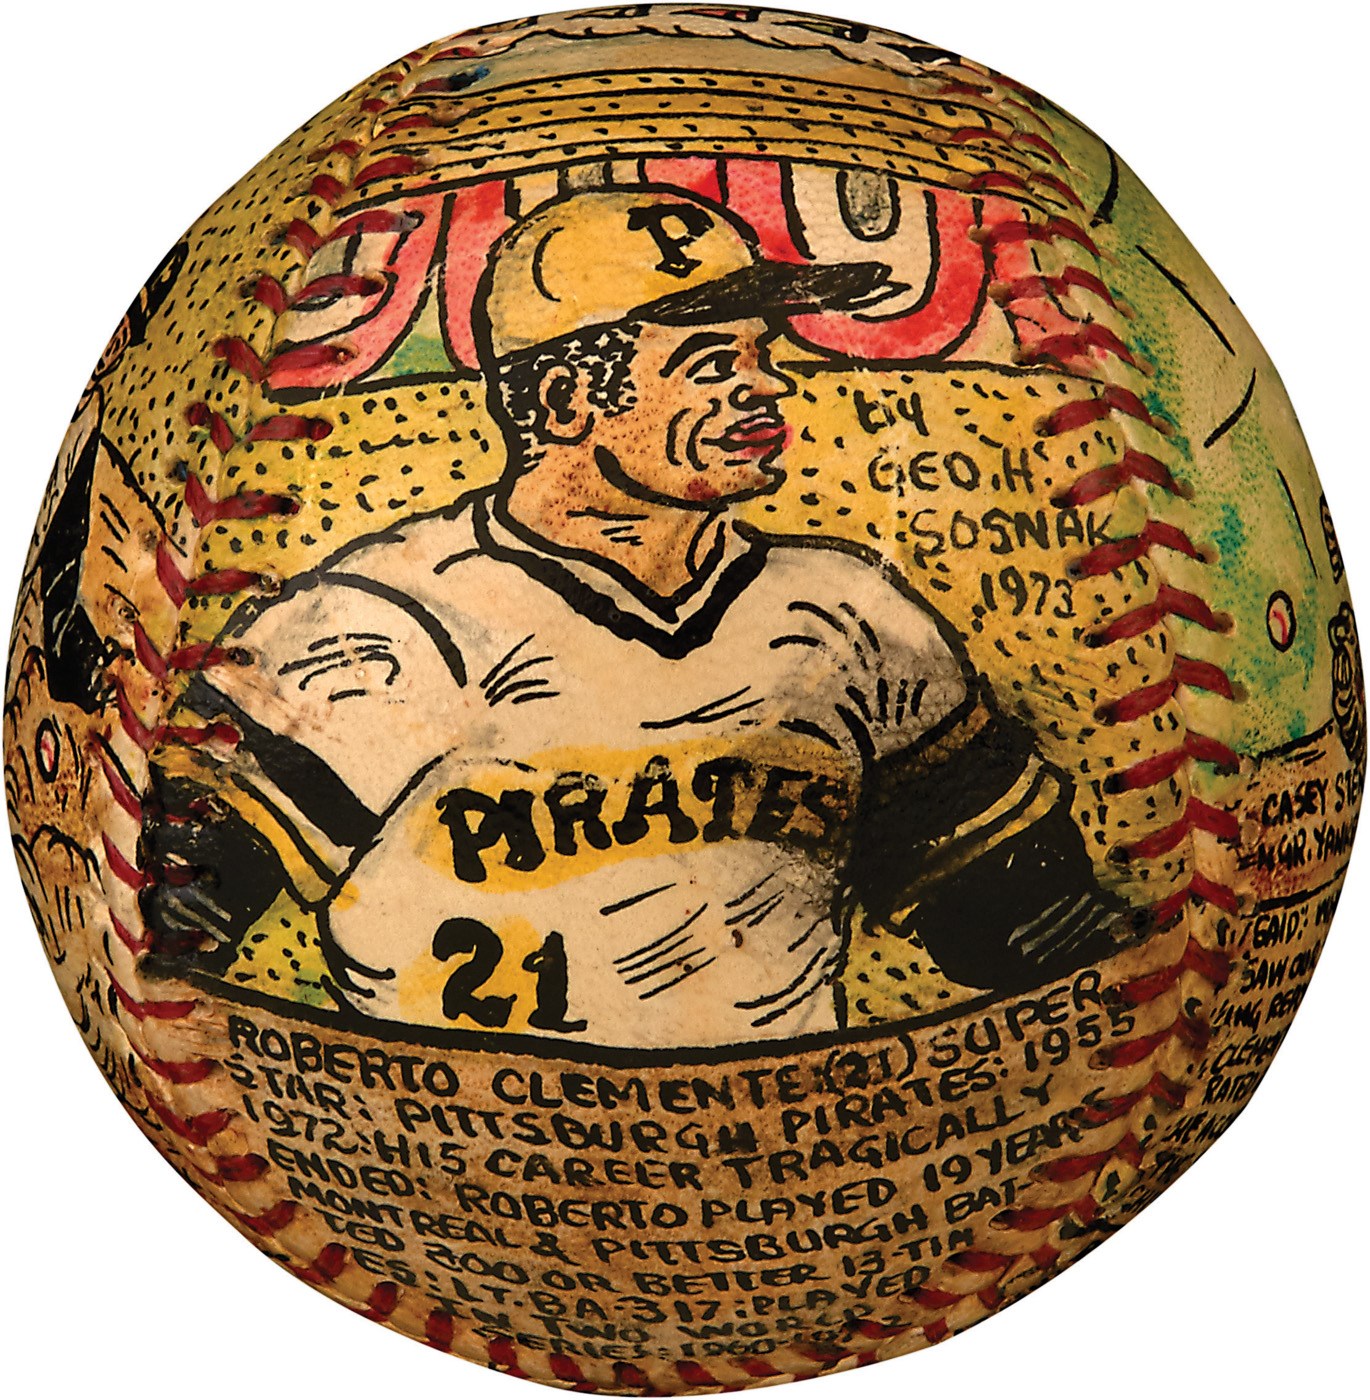 - Exceptional 1973 "Roberto Clemente Super Star" Painted Baseball by George Sosnak